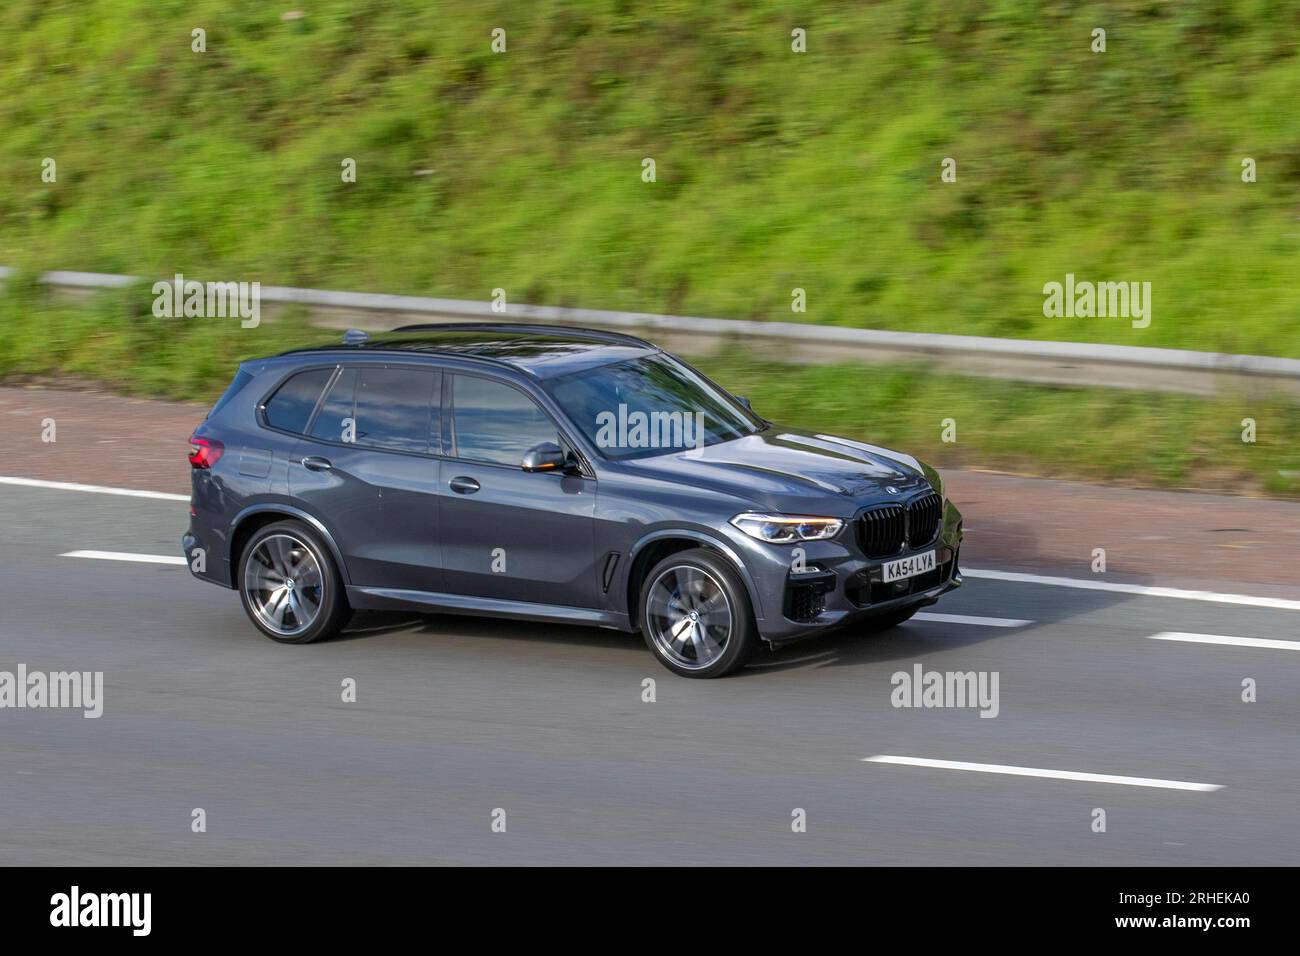 2020 BMW X5 M50d Auto Xdrive M50d 7St Auto Start/Stop Grey Car SUV Diesel 2993 cc travelling at speed on the M6 motorway in Greater Manchester, UK Stock Photo